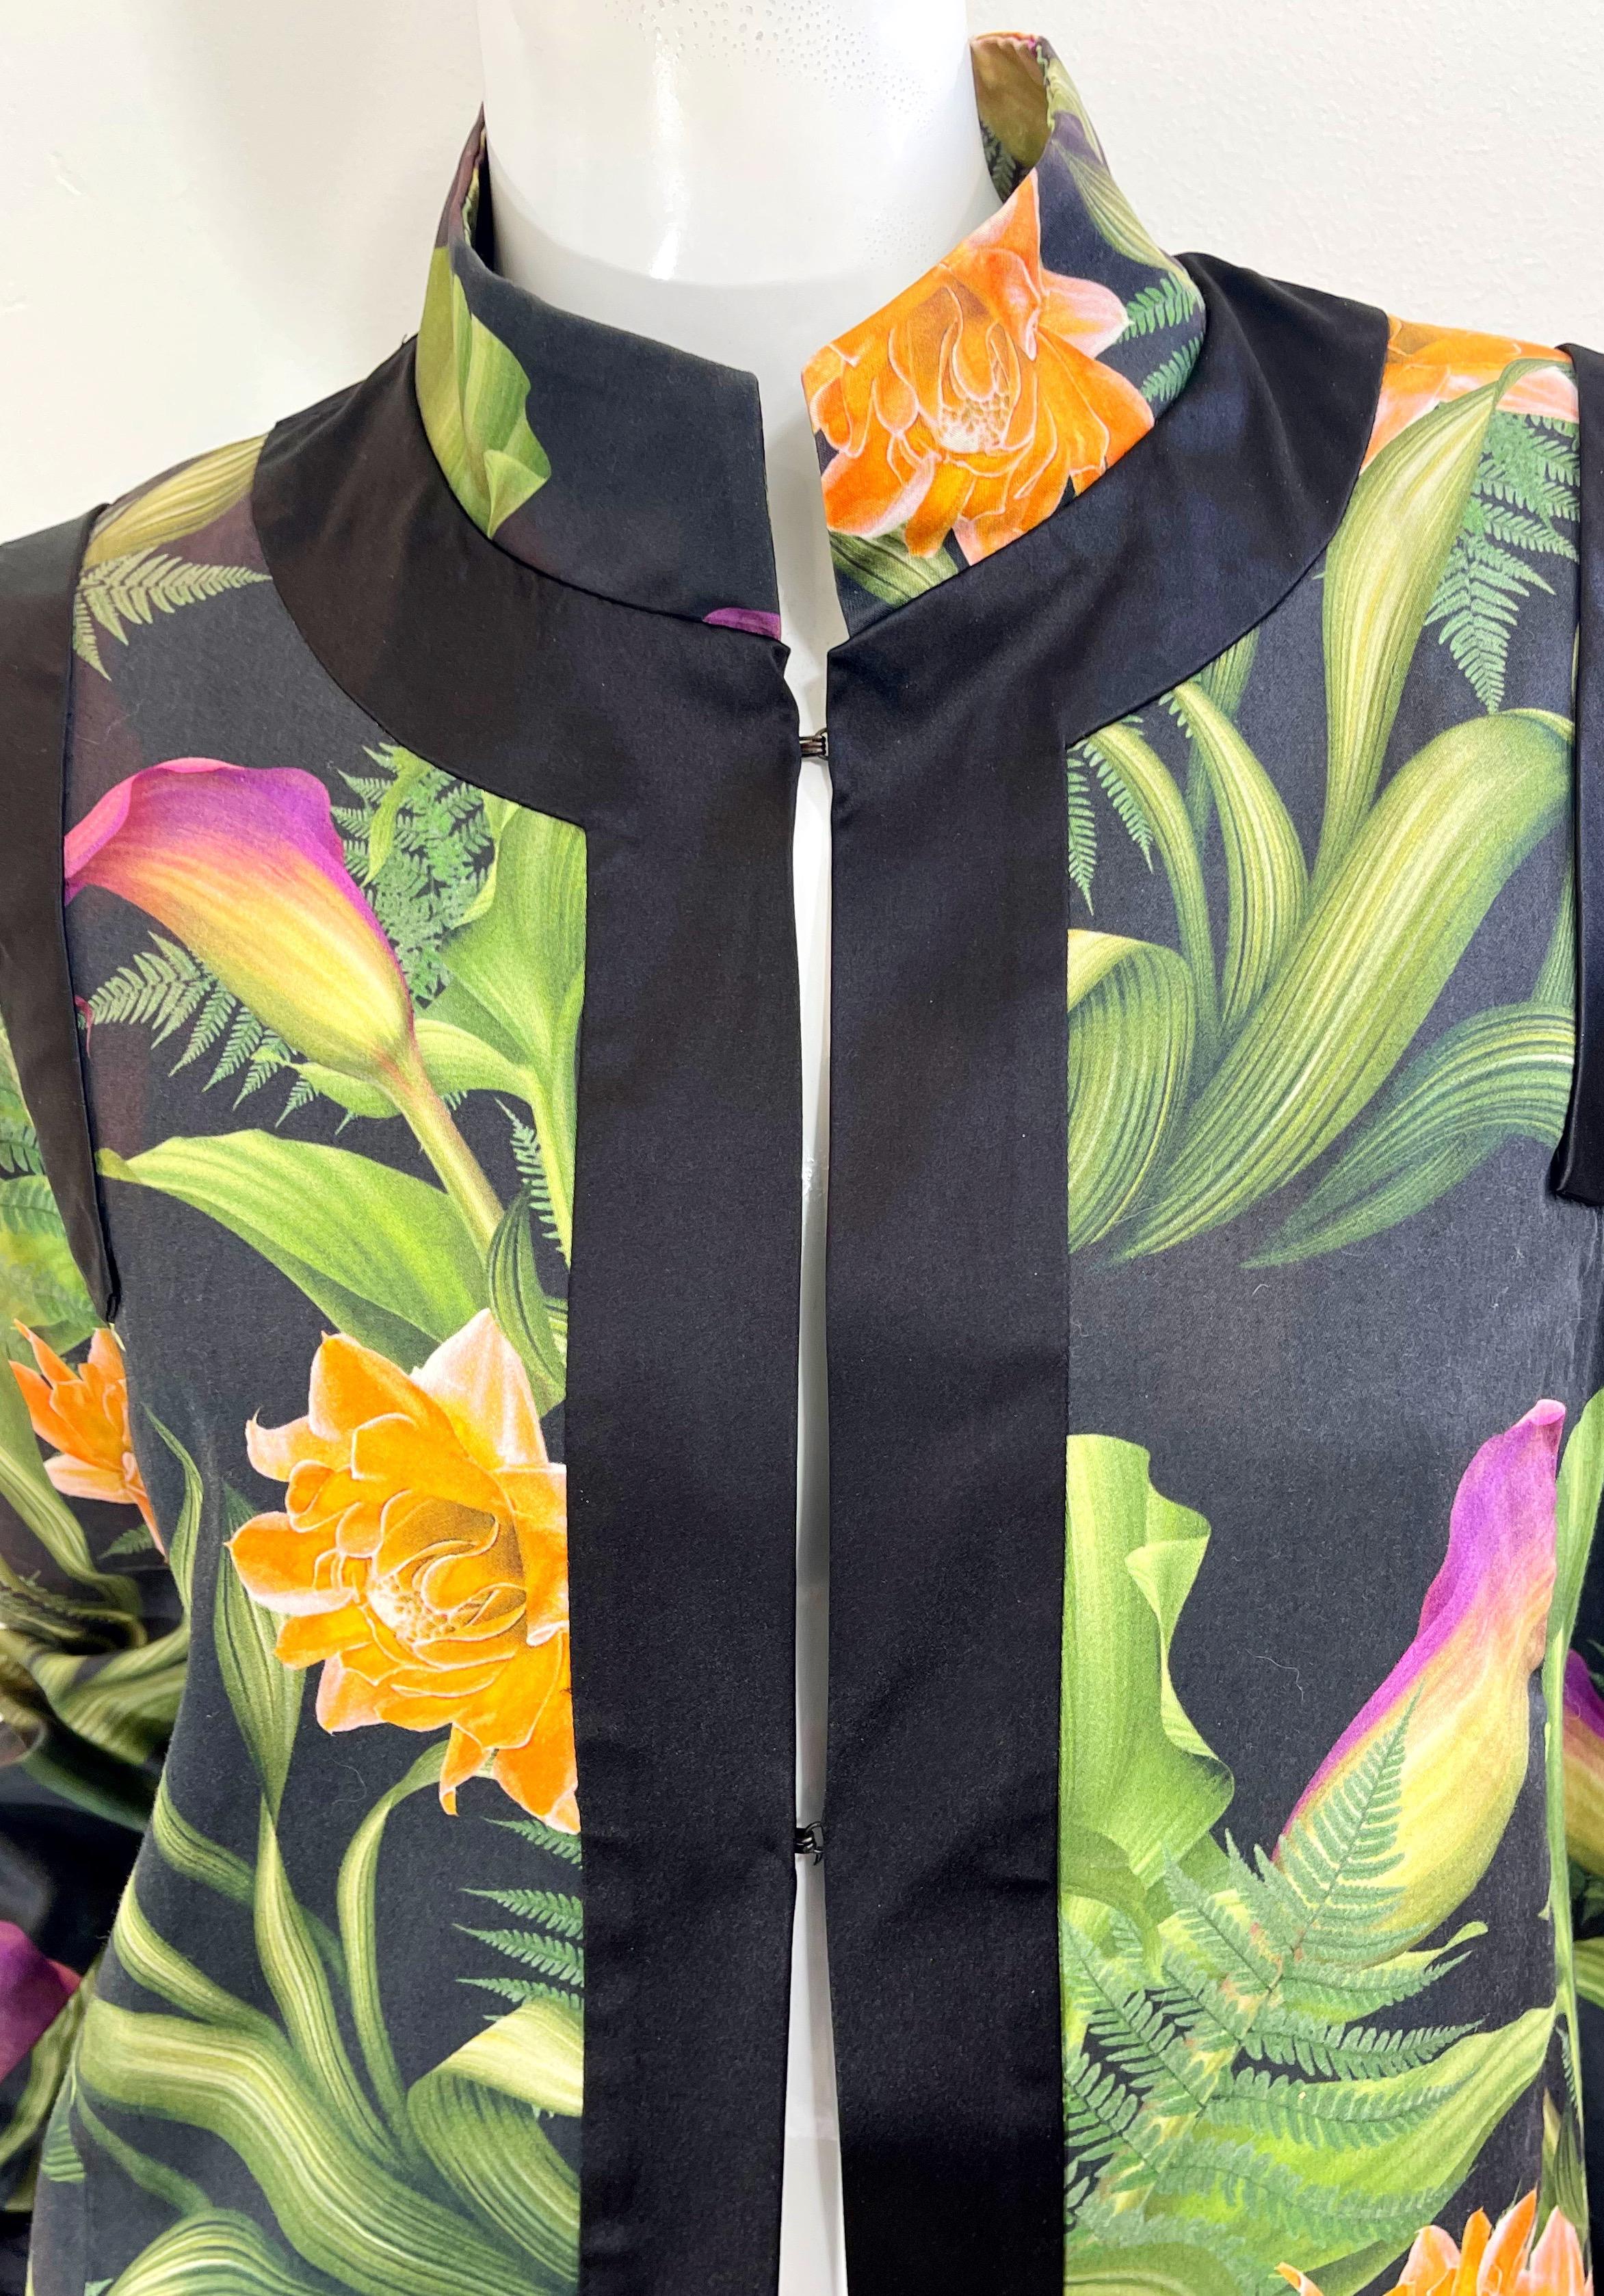 Paola Quadretti 1990s Couture Botanical Gardens Printed Silk Vintage 90s Jacket In Excellent Condition For Sale In San Diego, CA